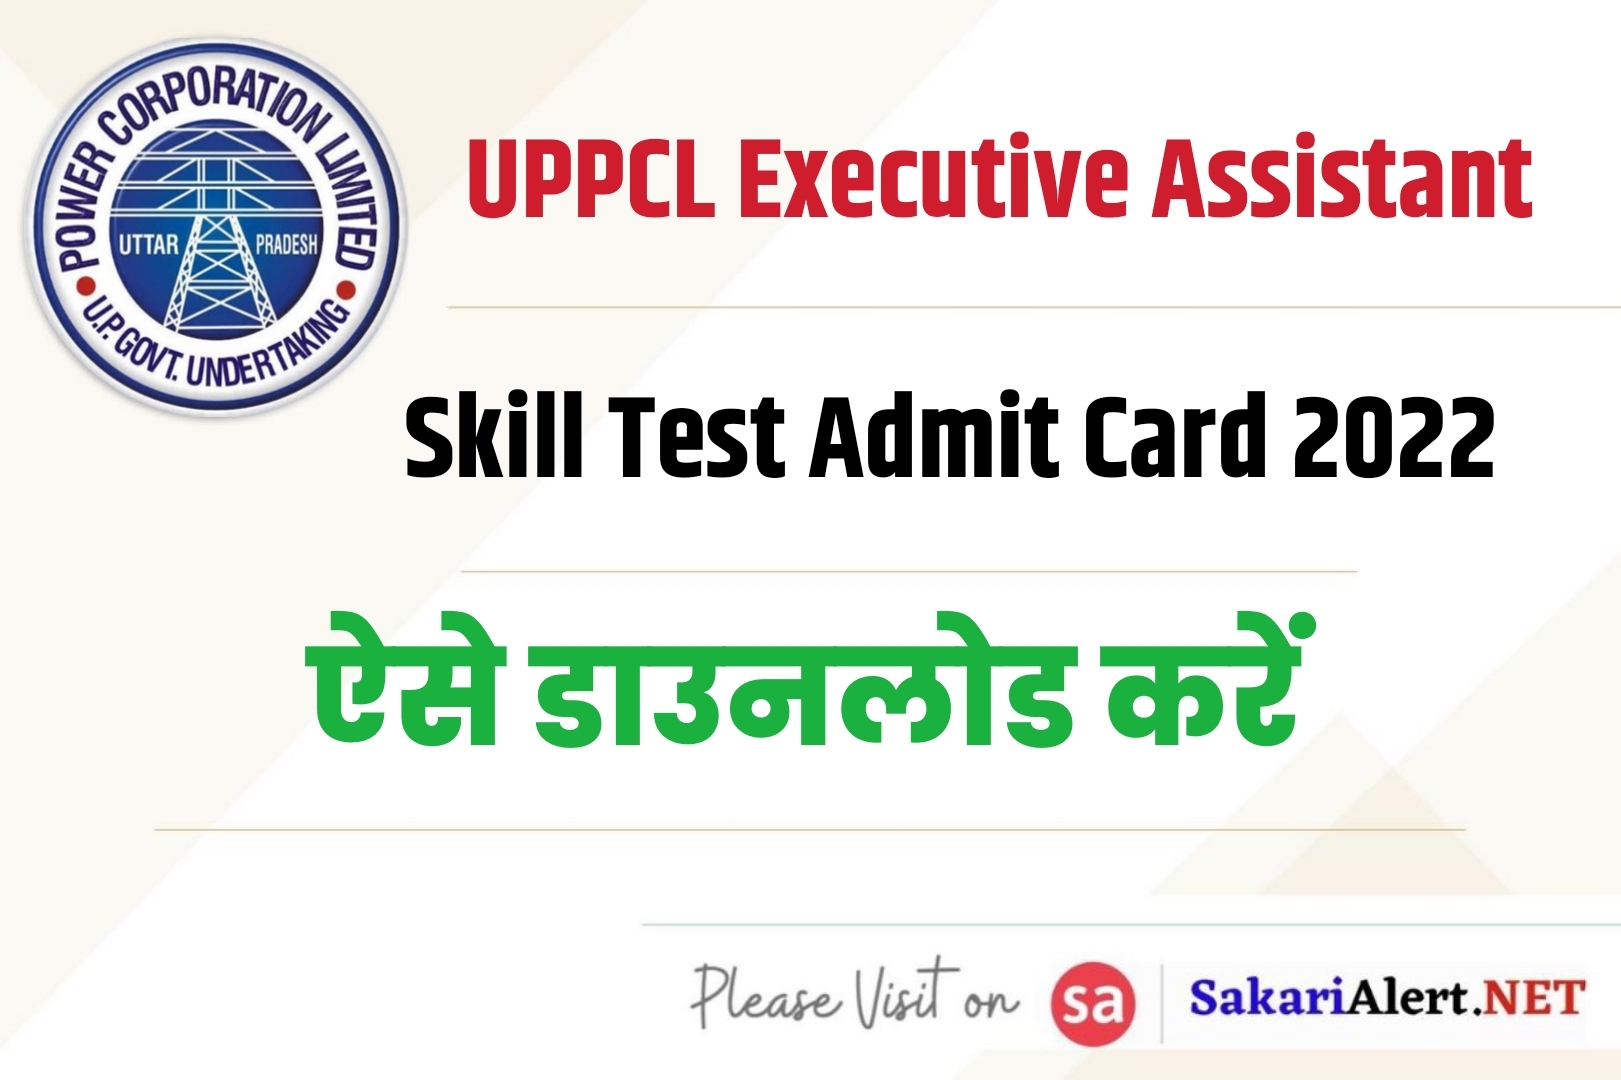 UPPCL Executive Assistant Skill Test Admit Card 2022